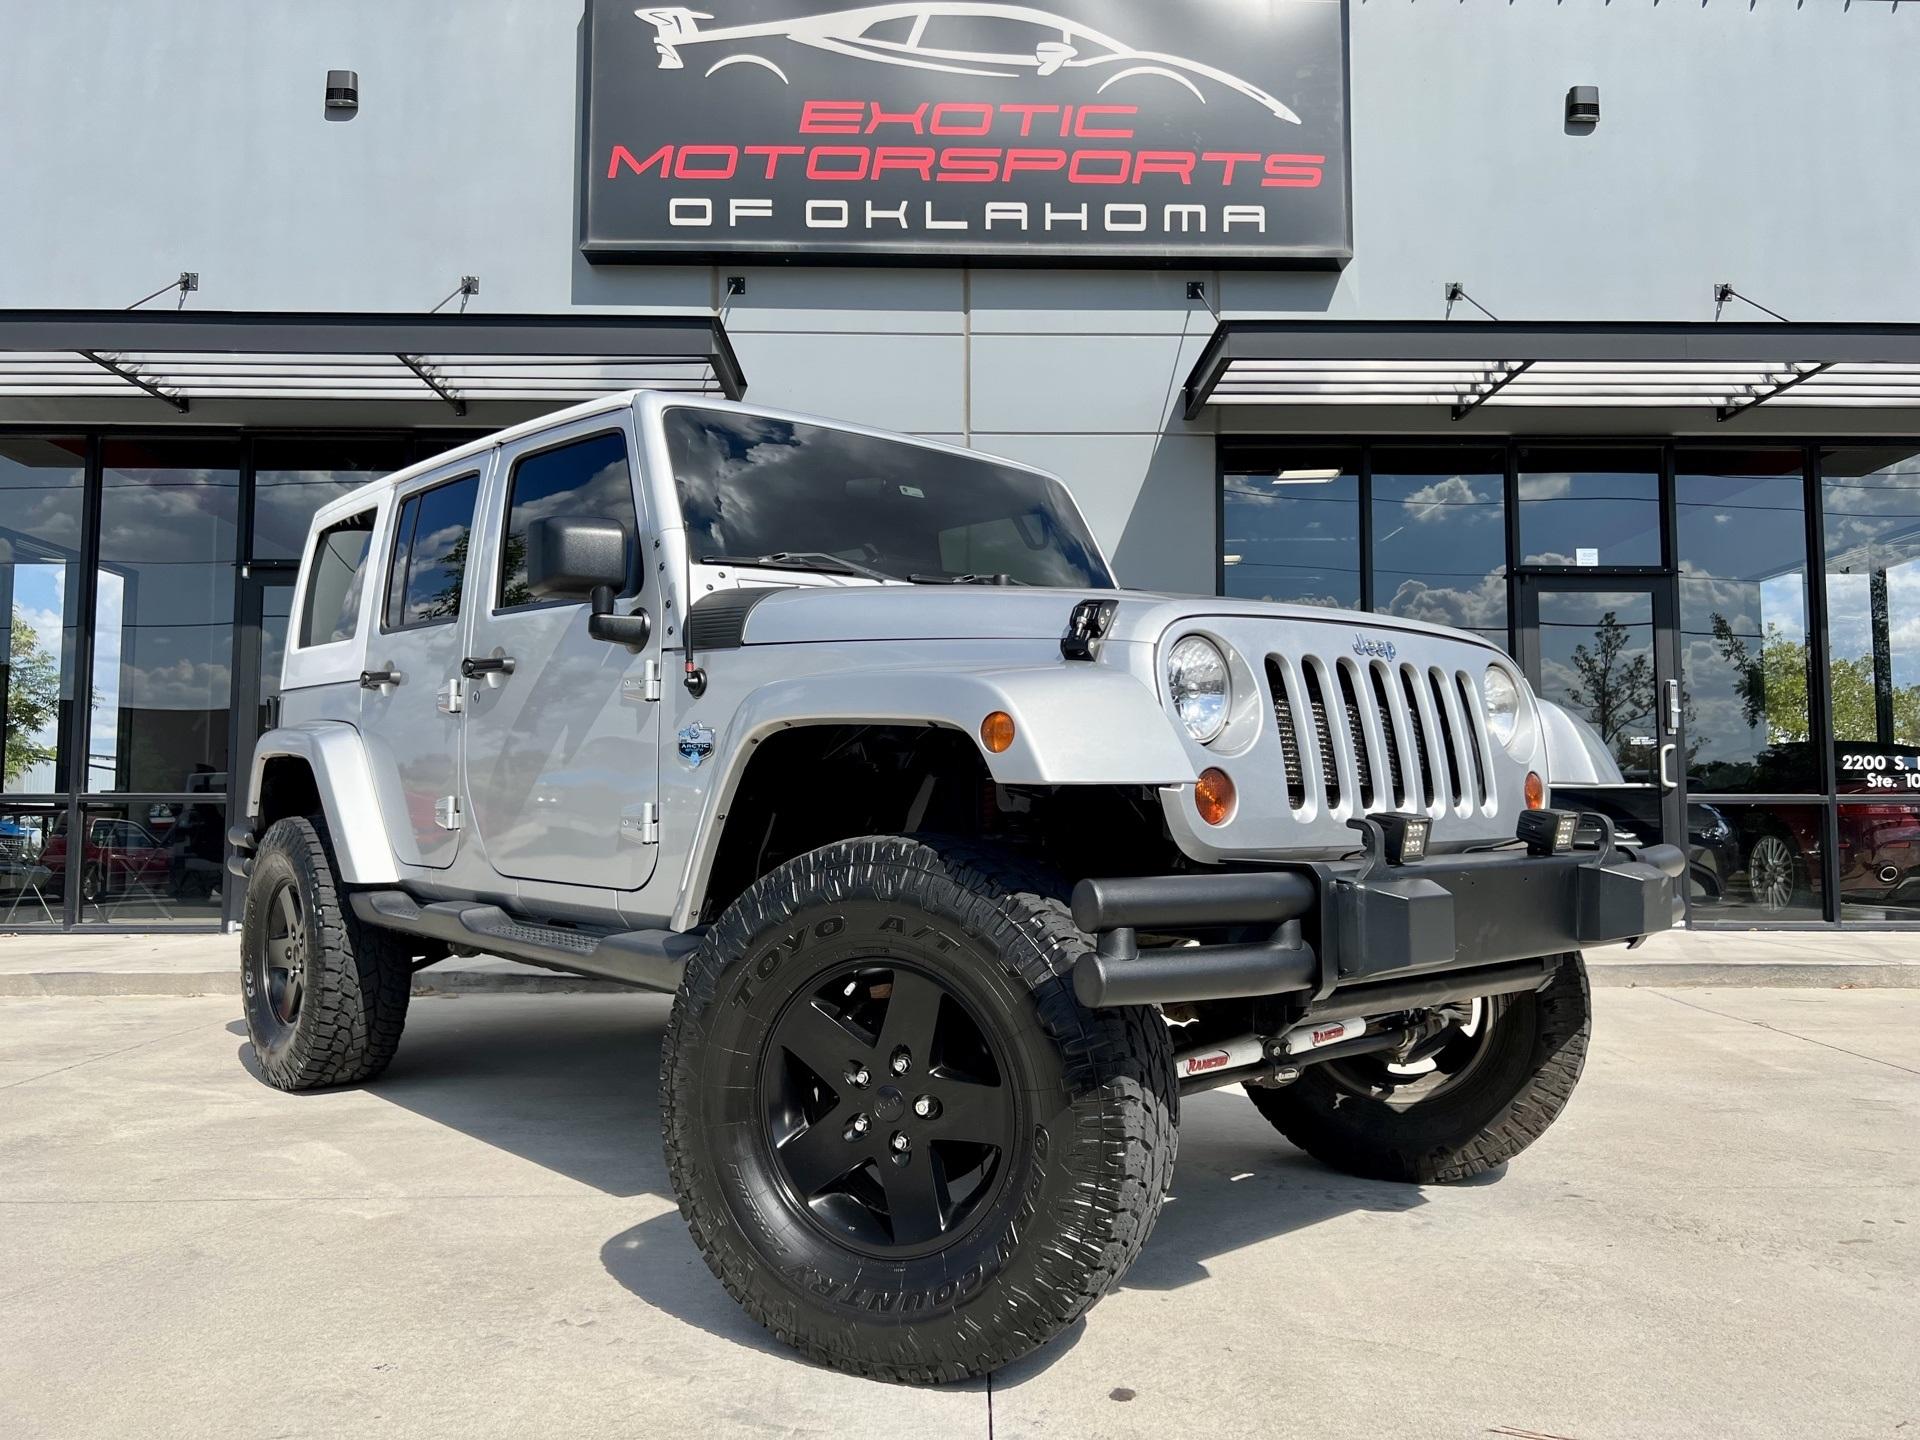 Used 2012 Jeep Wrangler Unlimited Sahara Arctic Edition For Sale (Sold) |  Exotic Motorsports of Oklahoma Stock #A183-1